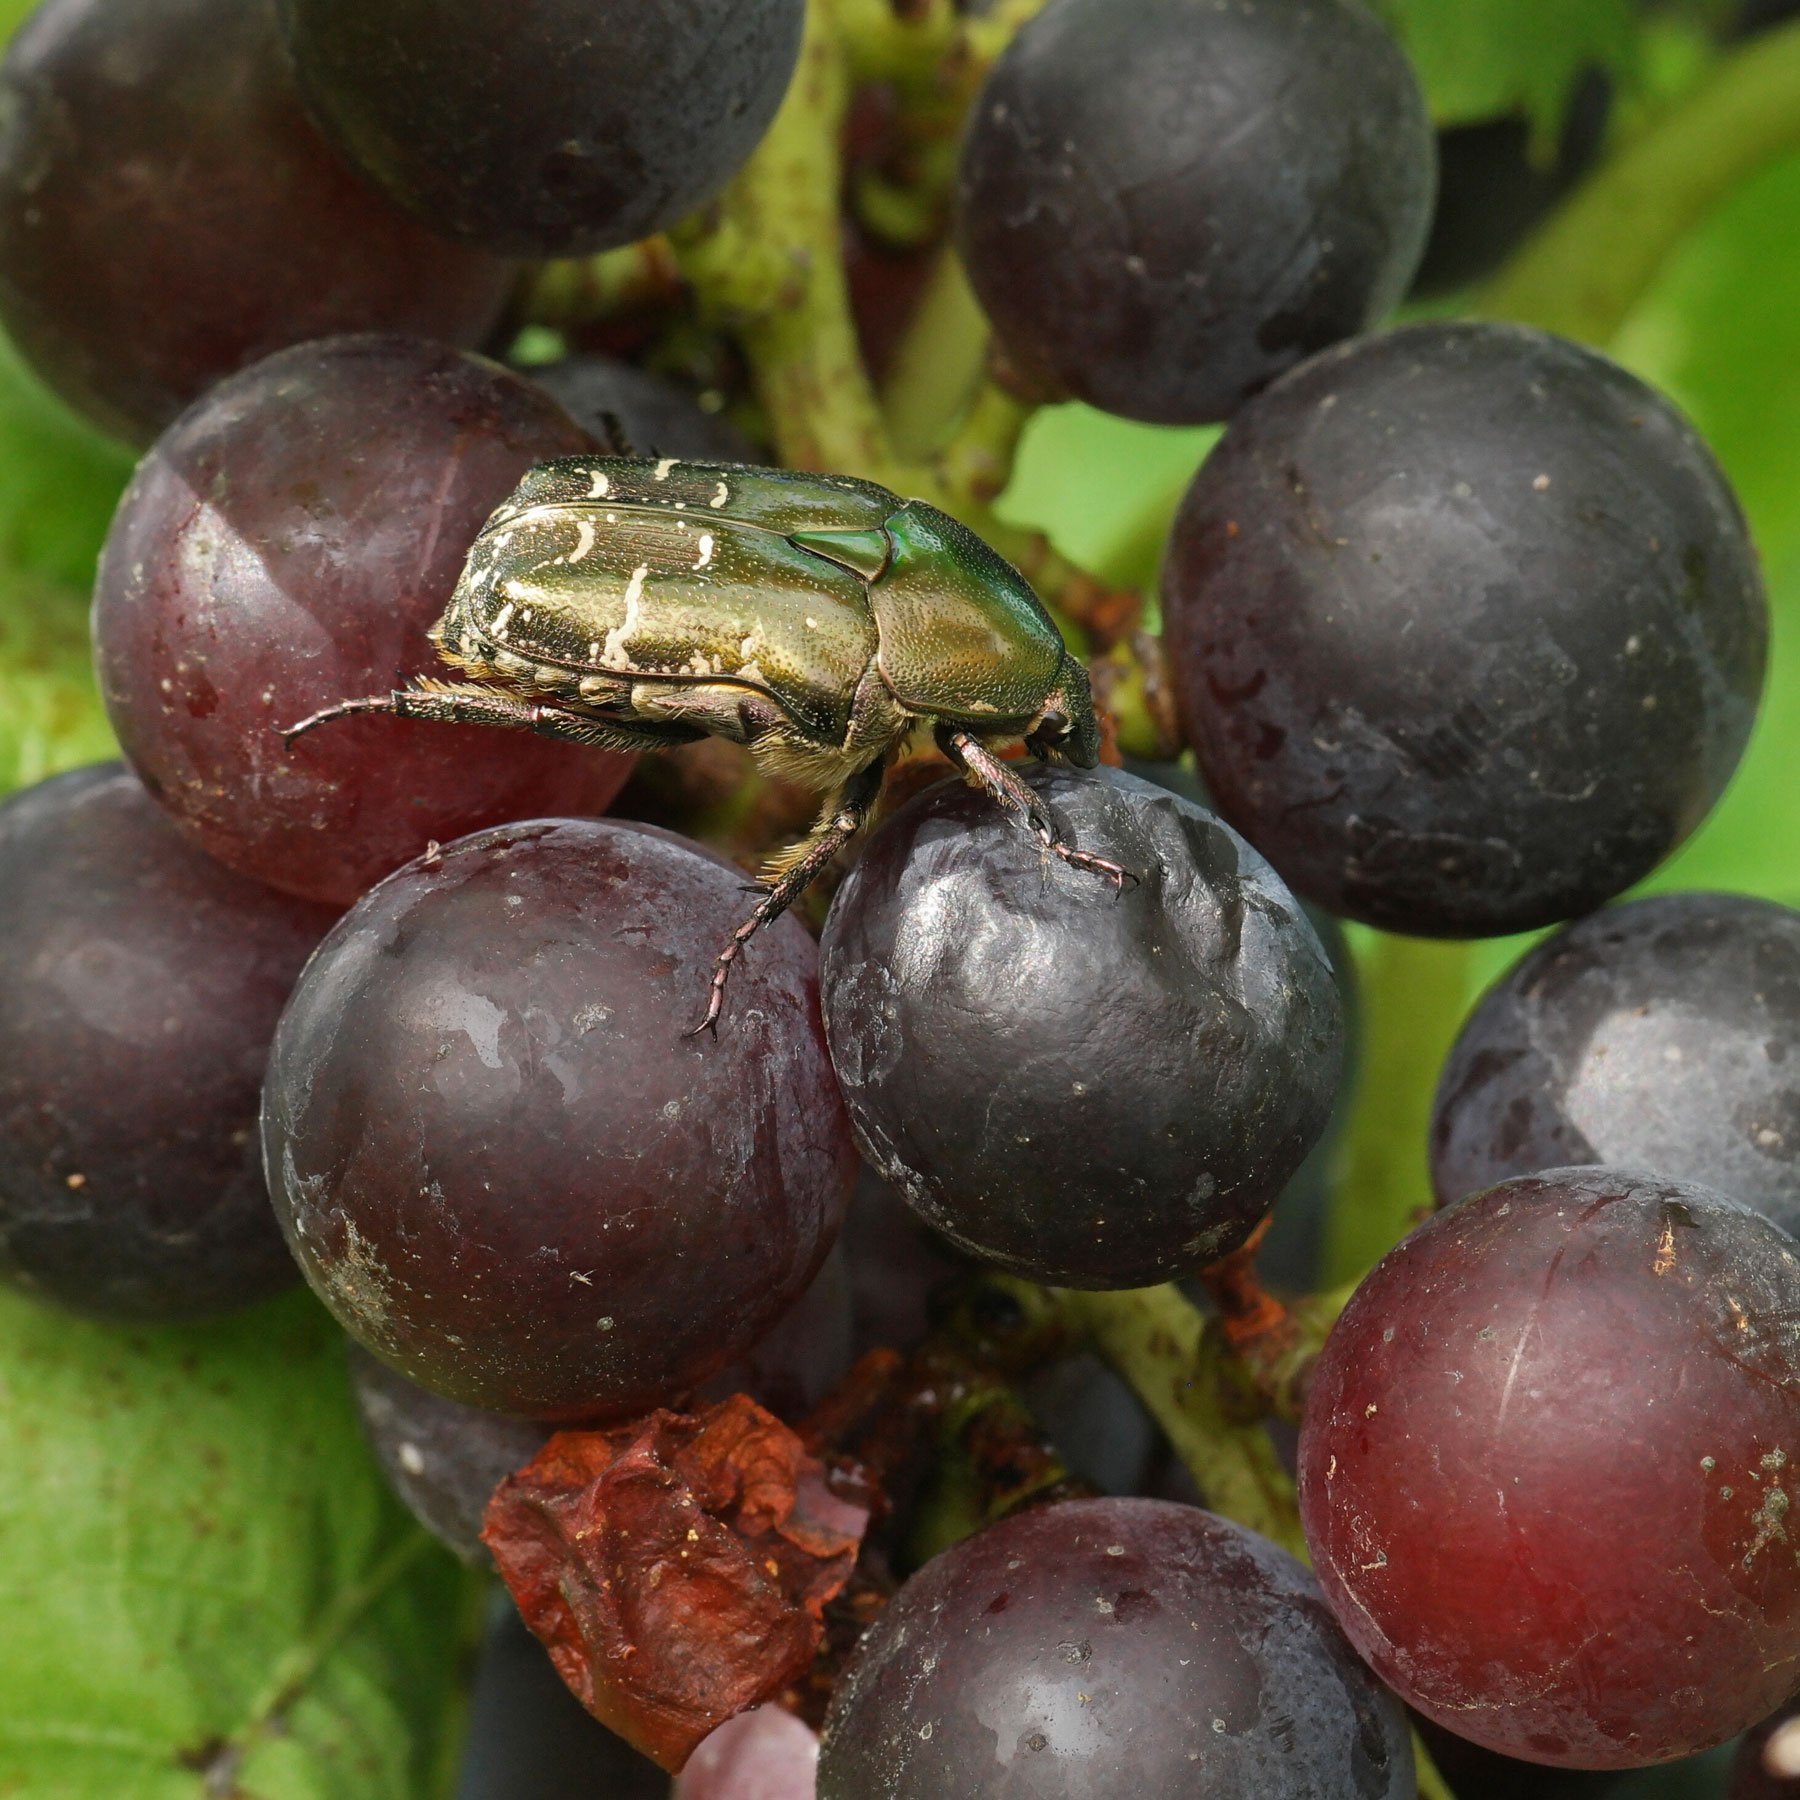 Rose Chafer on grapes